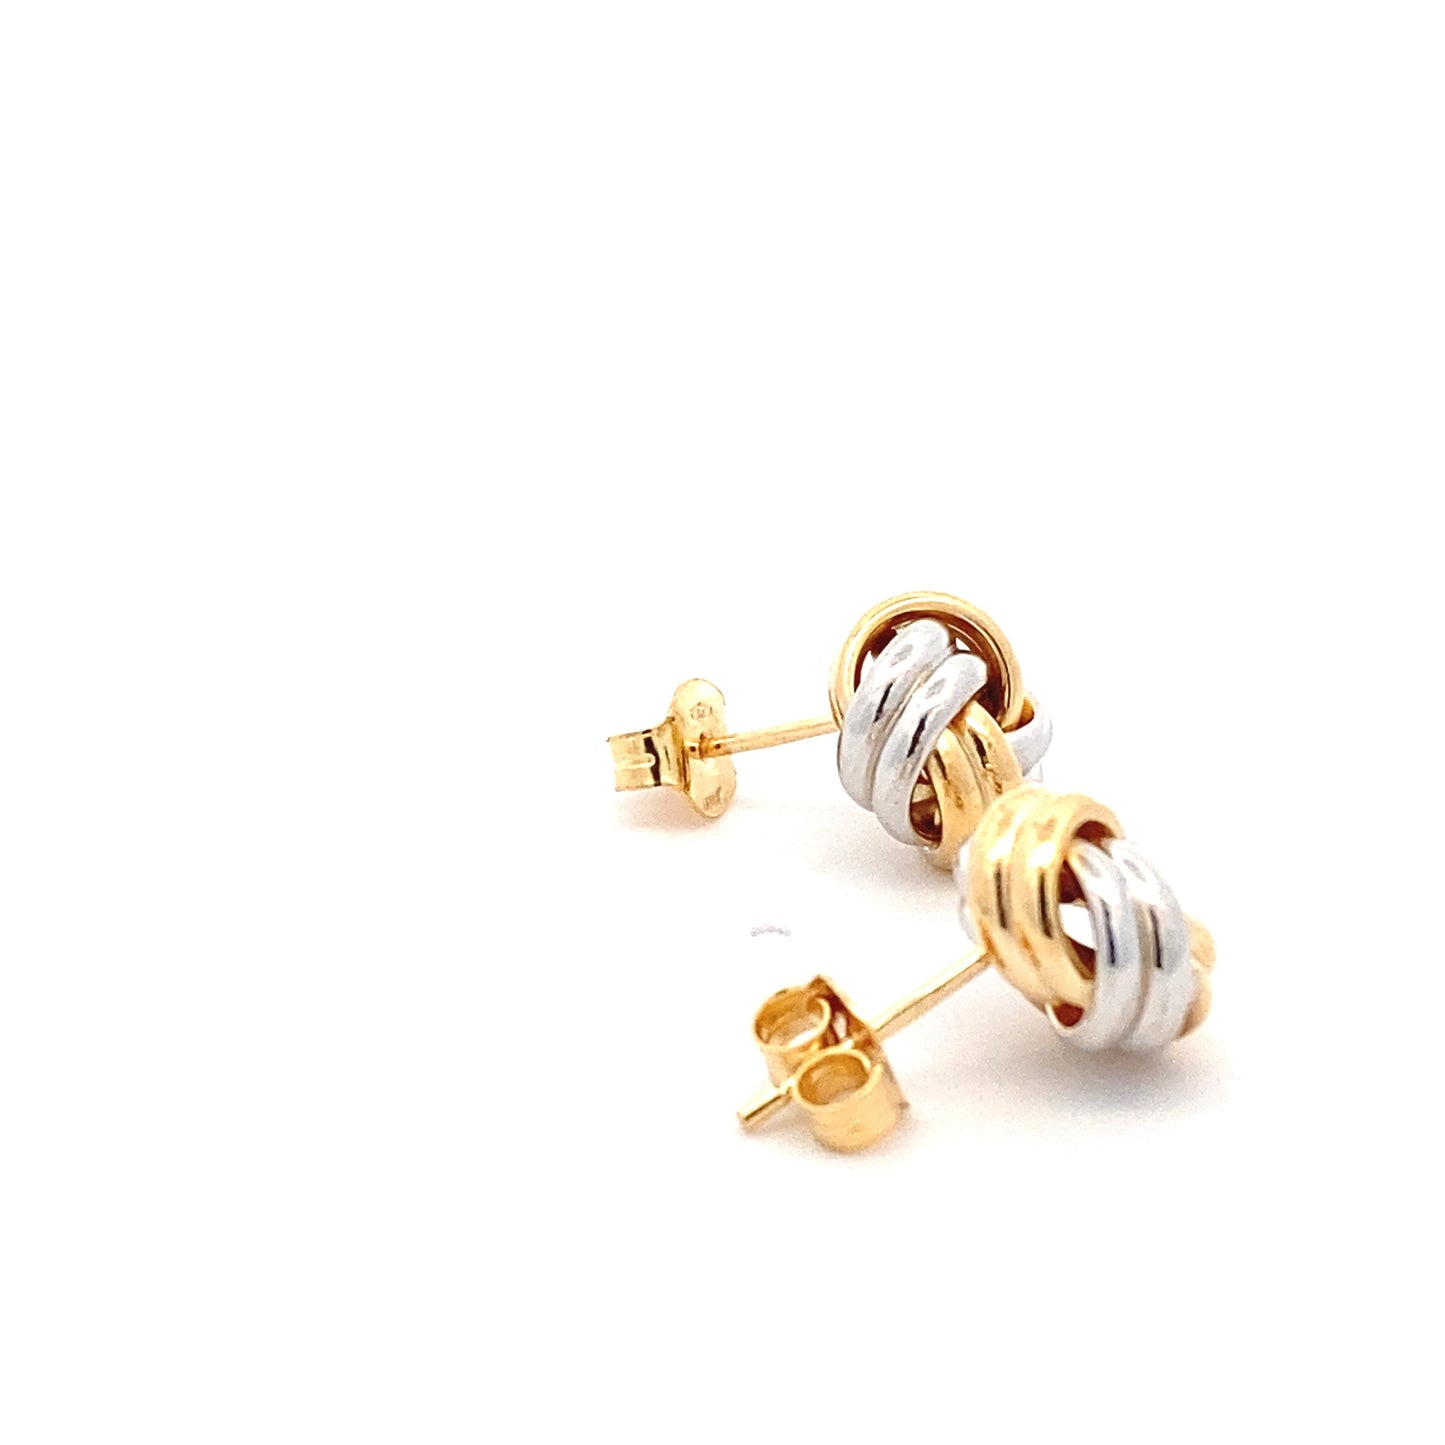 Yellow and White Gold Knot Earrings  Gardiner Brothers   